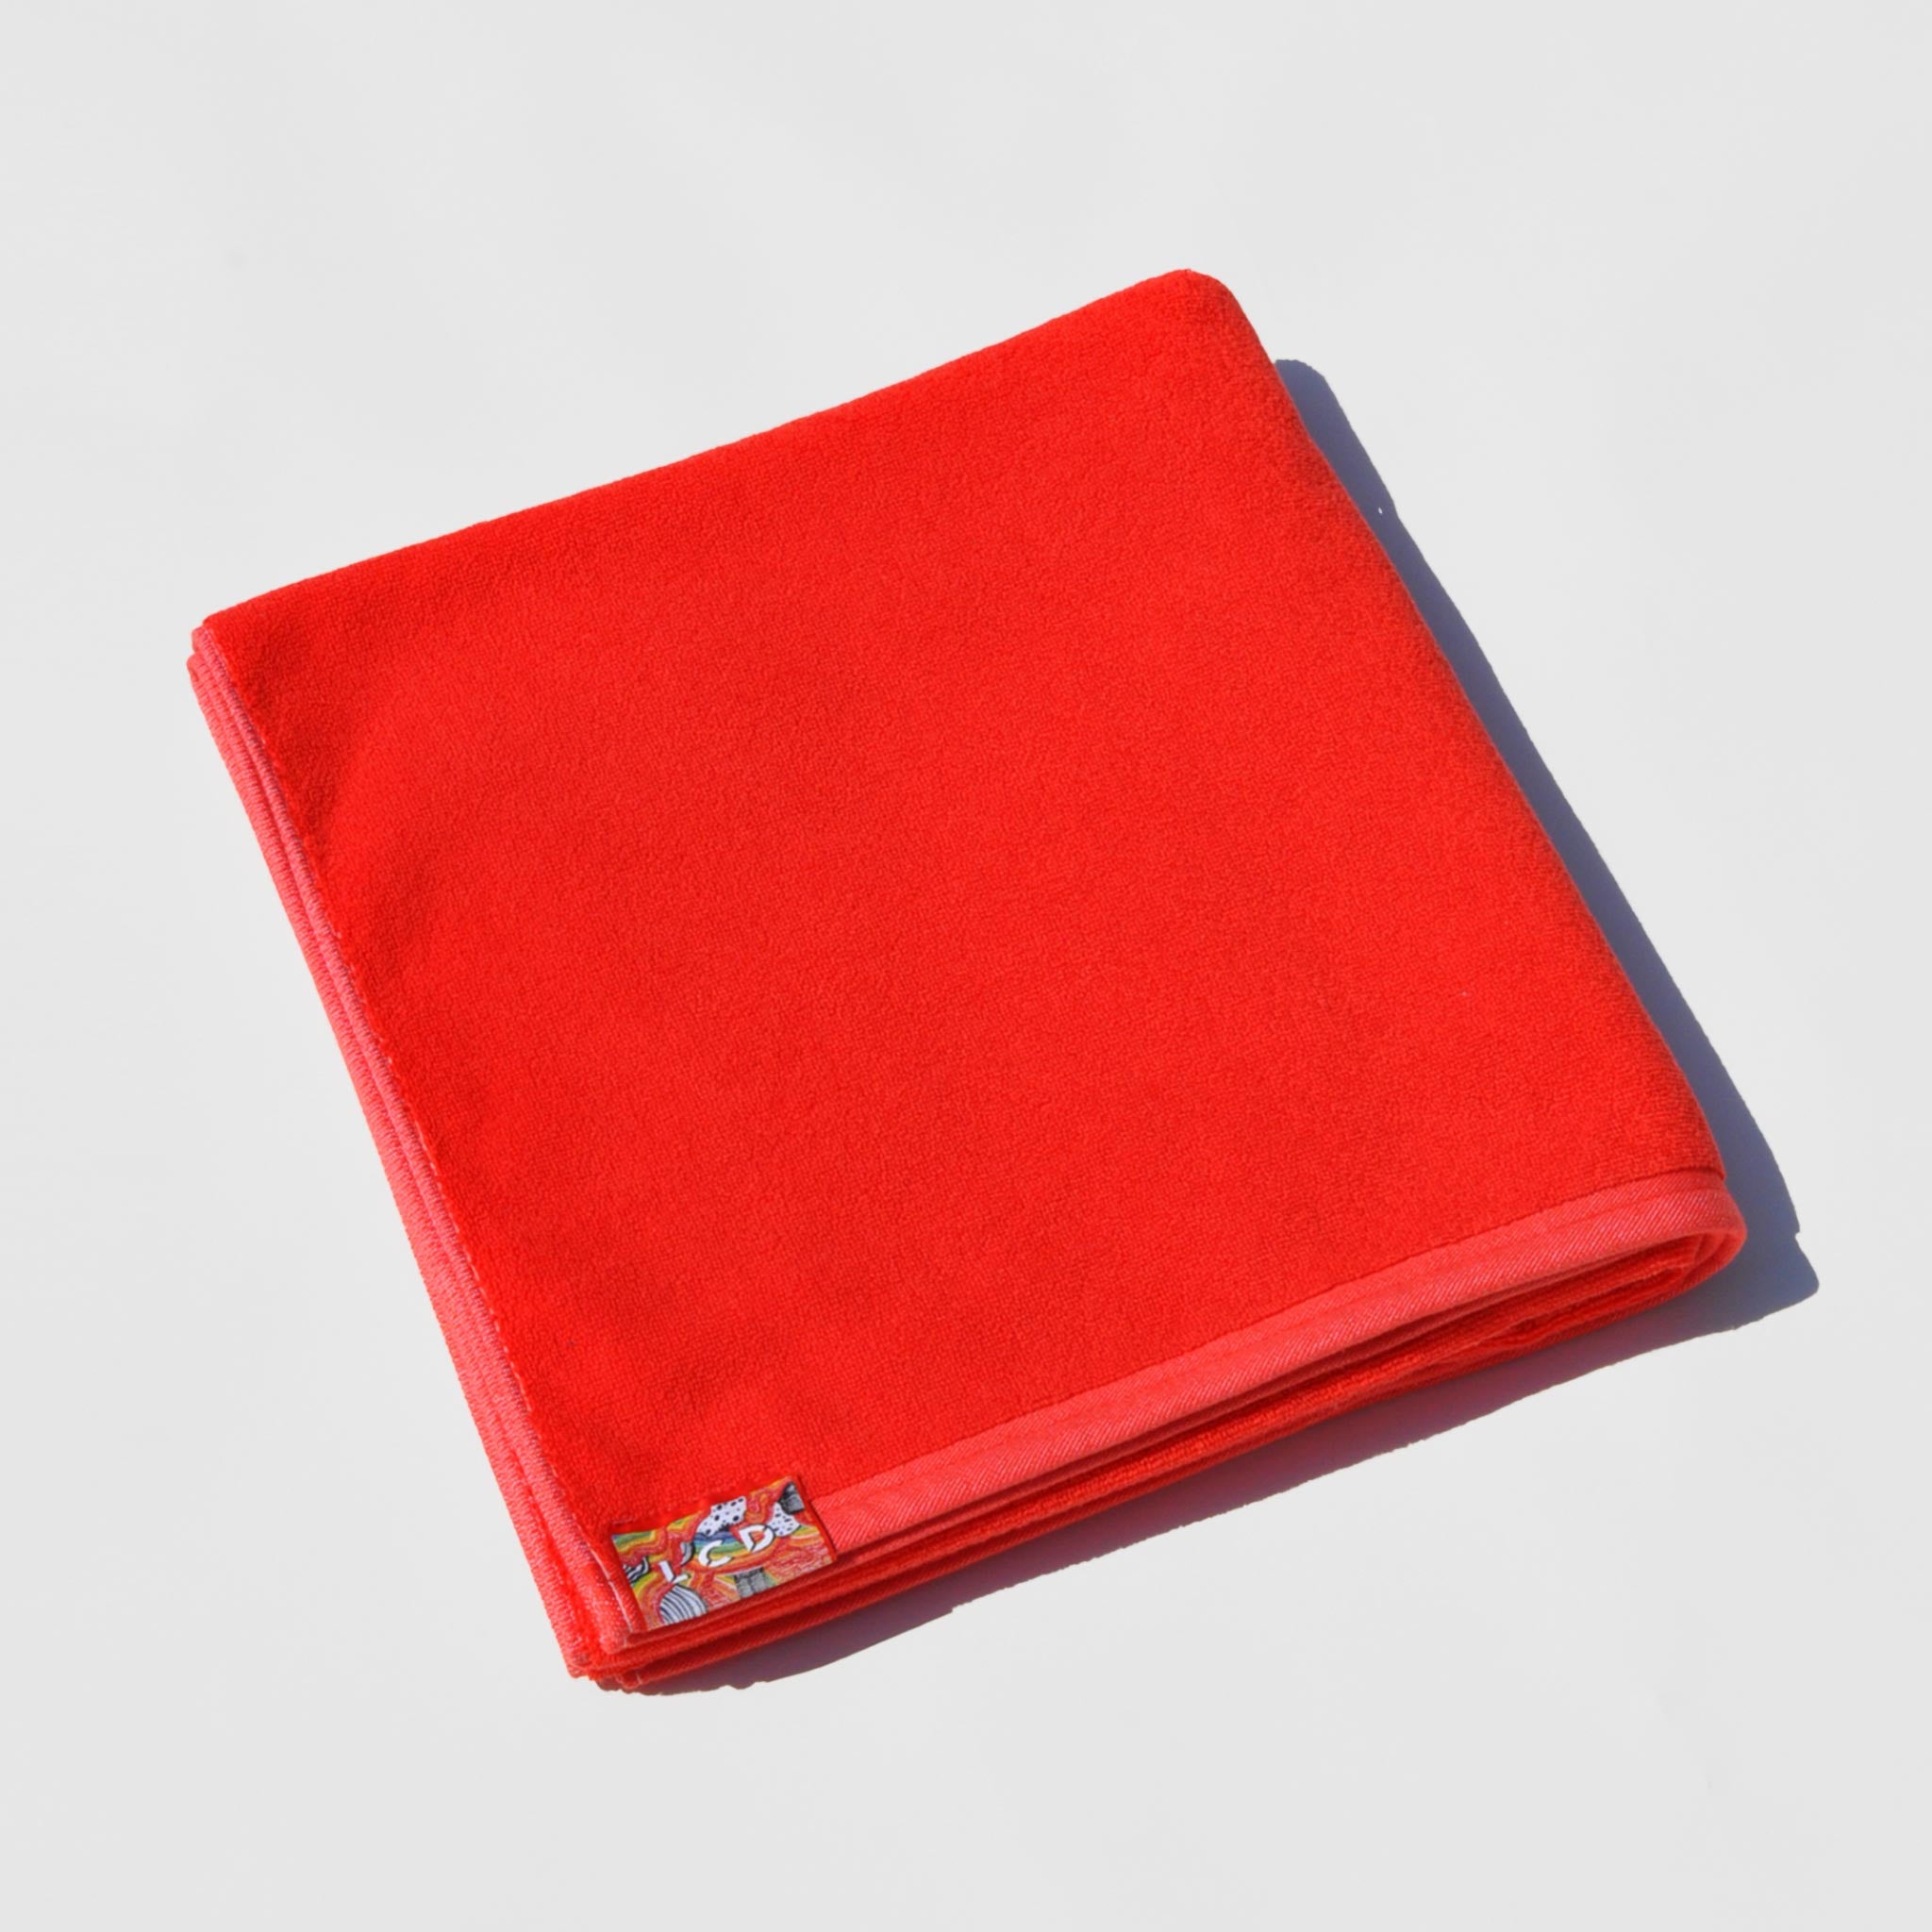 Flat image of the jacquard beach & bath towel in light red by LCD.